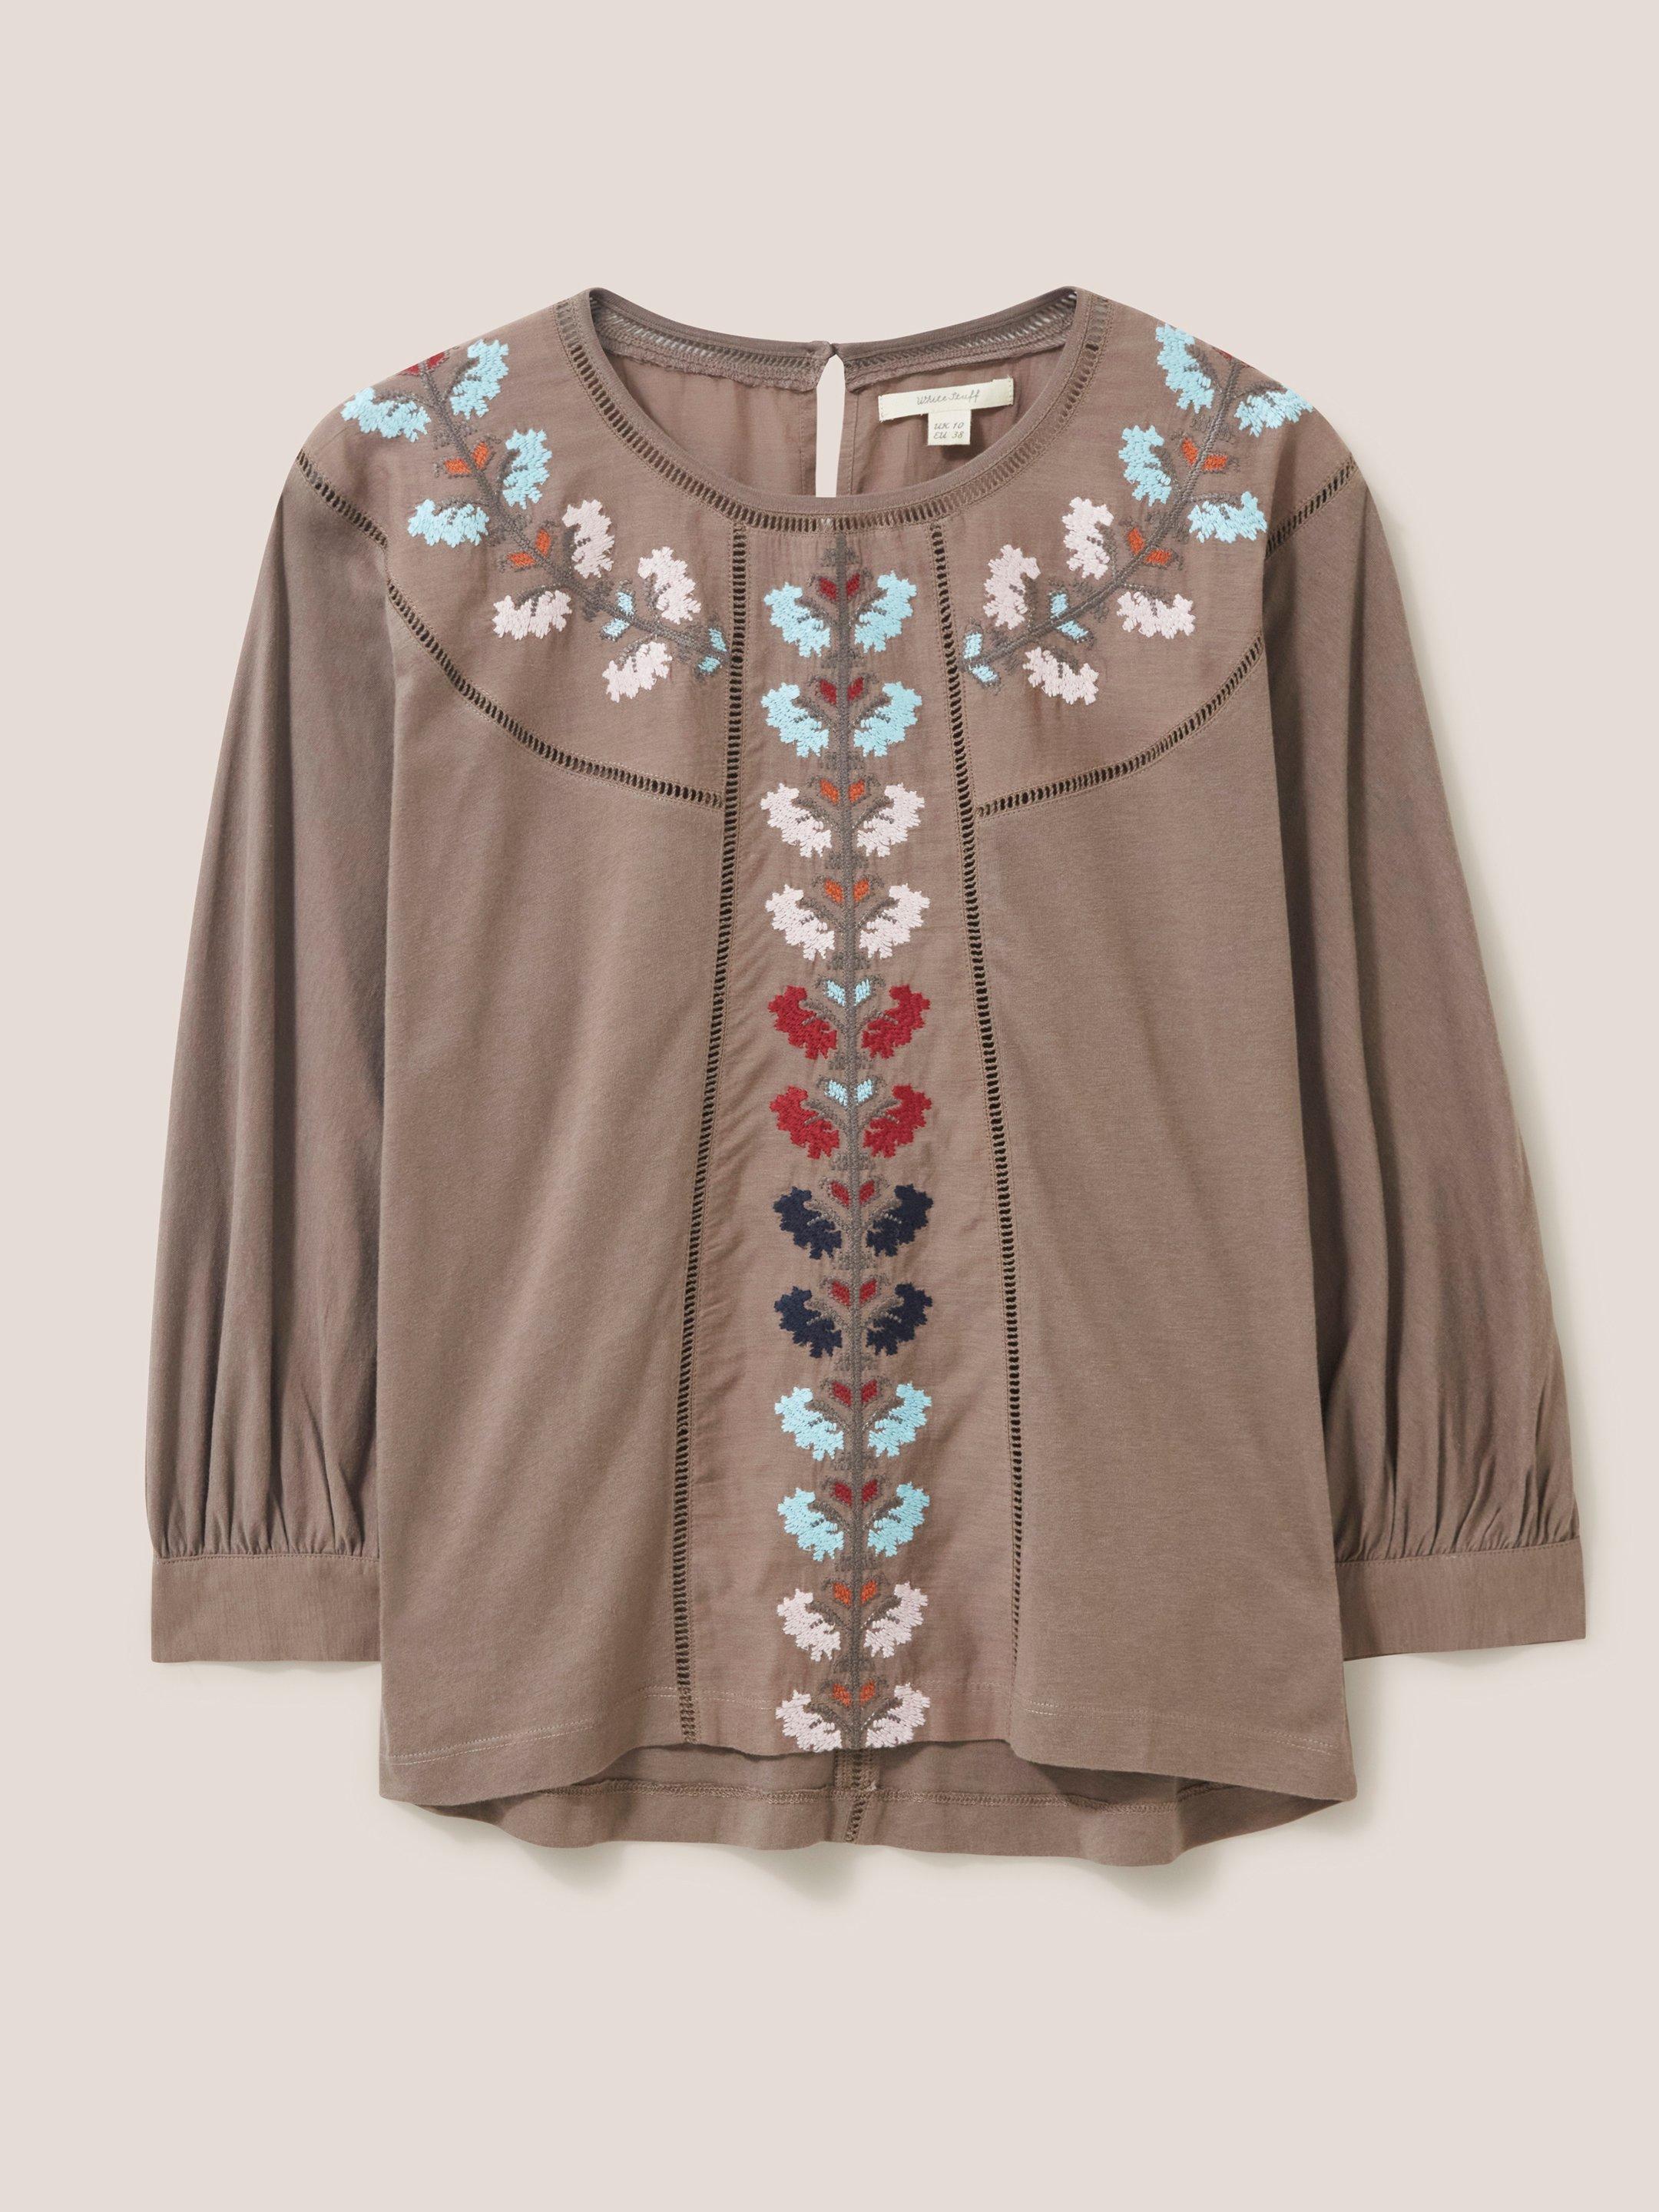 MOLLIE EMBROIDERED TOP in NAT MLT - FLAT FRONT